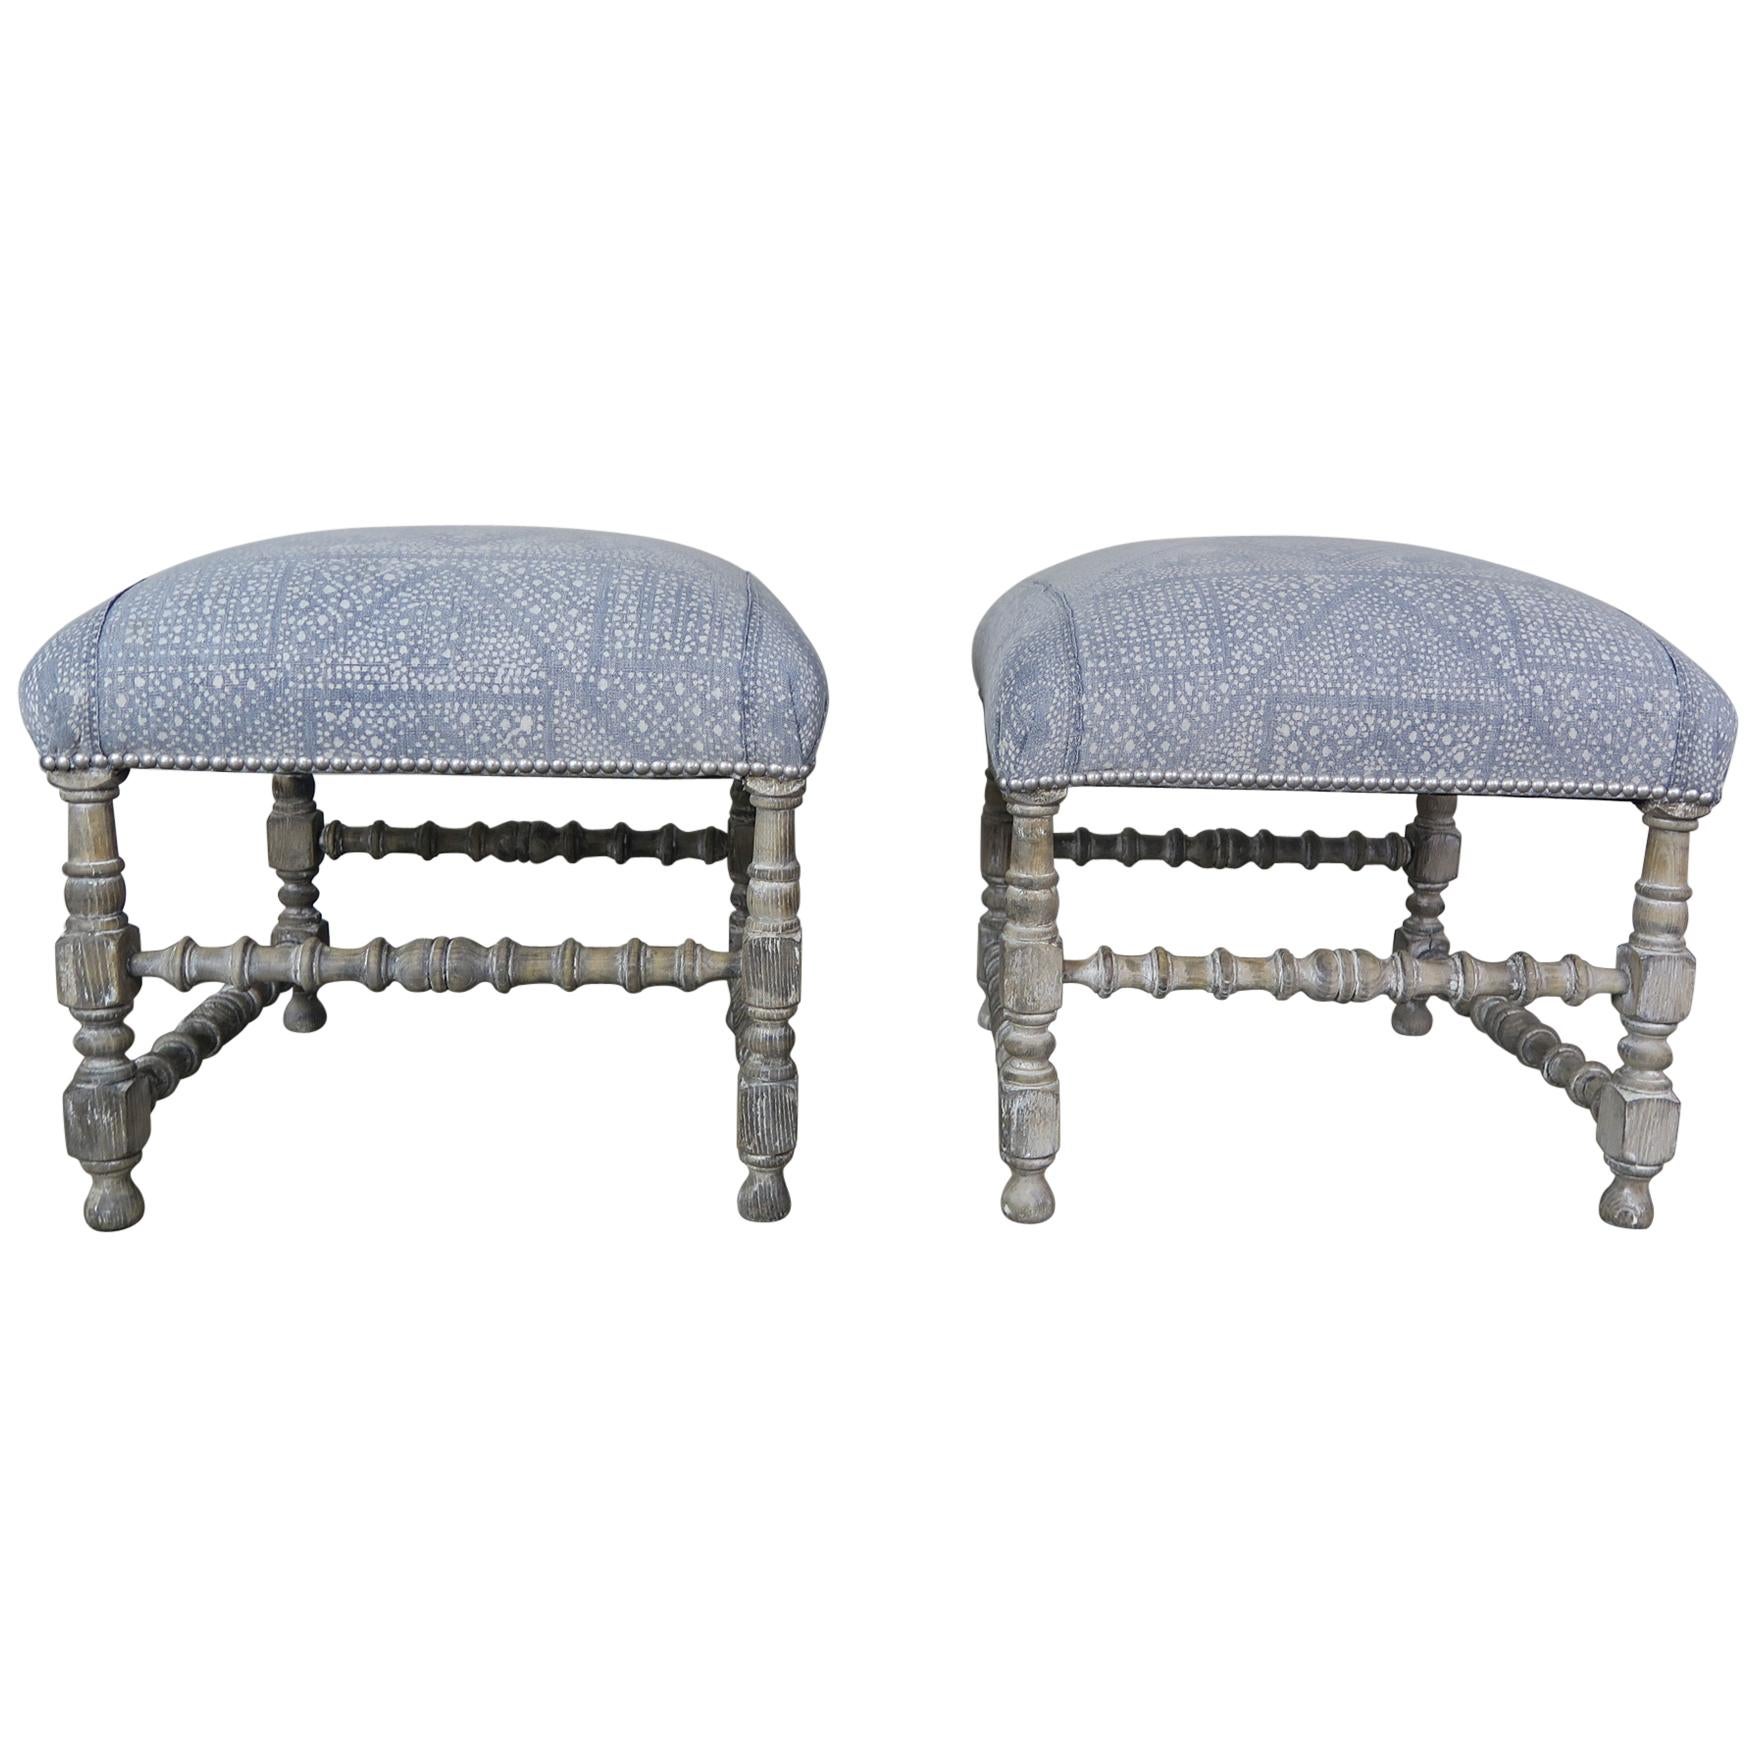 Painted Swedish Benches with Batik Cotton Upholstery, circa 1930s